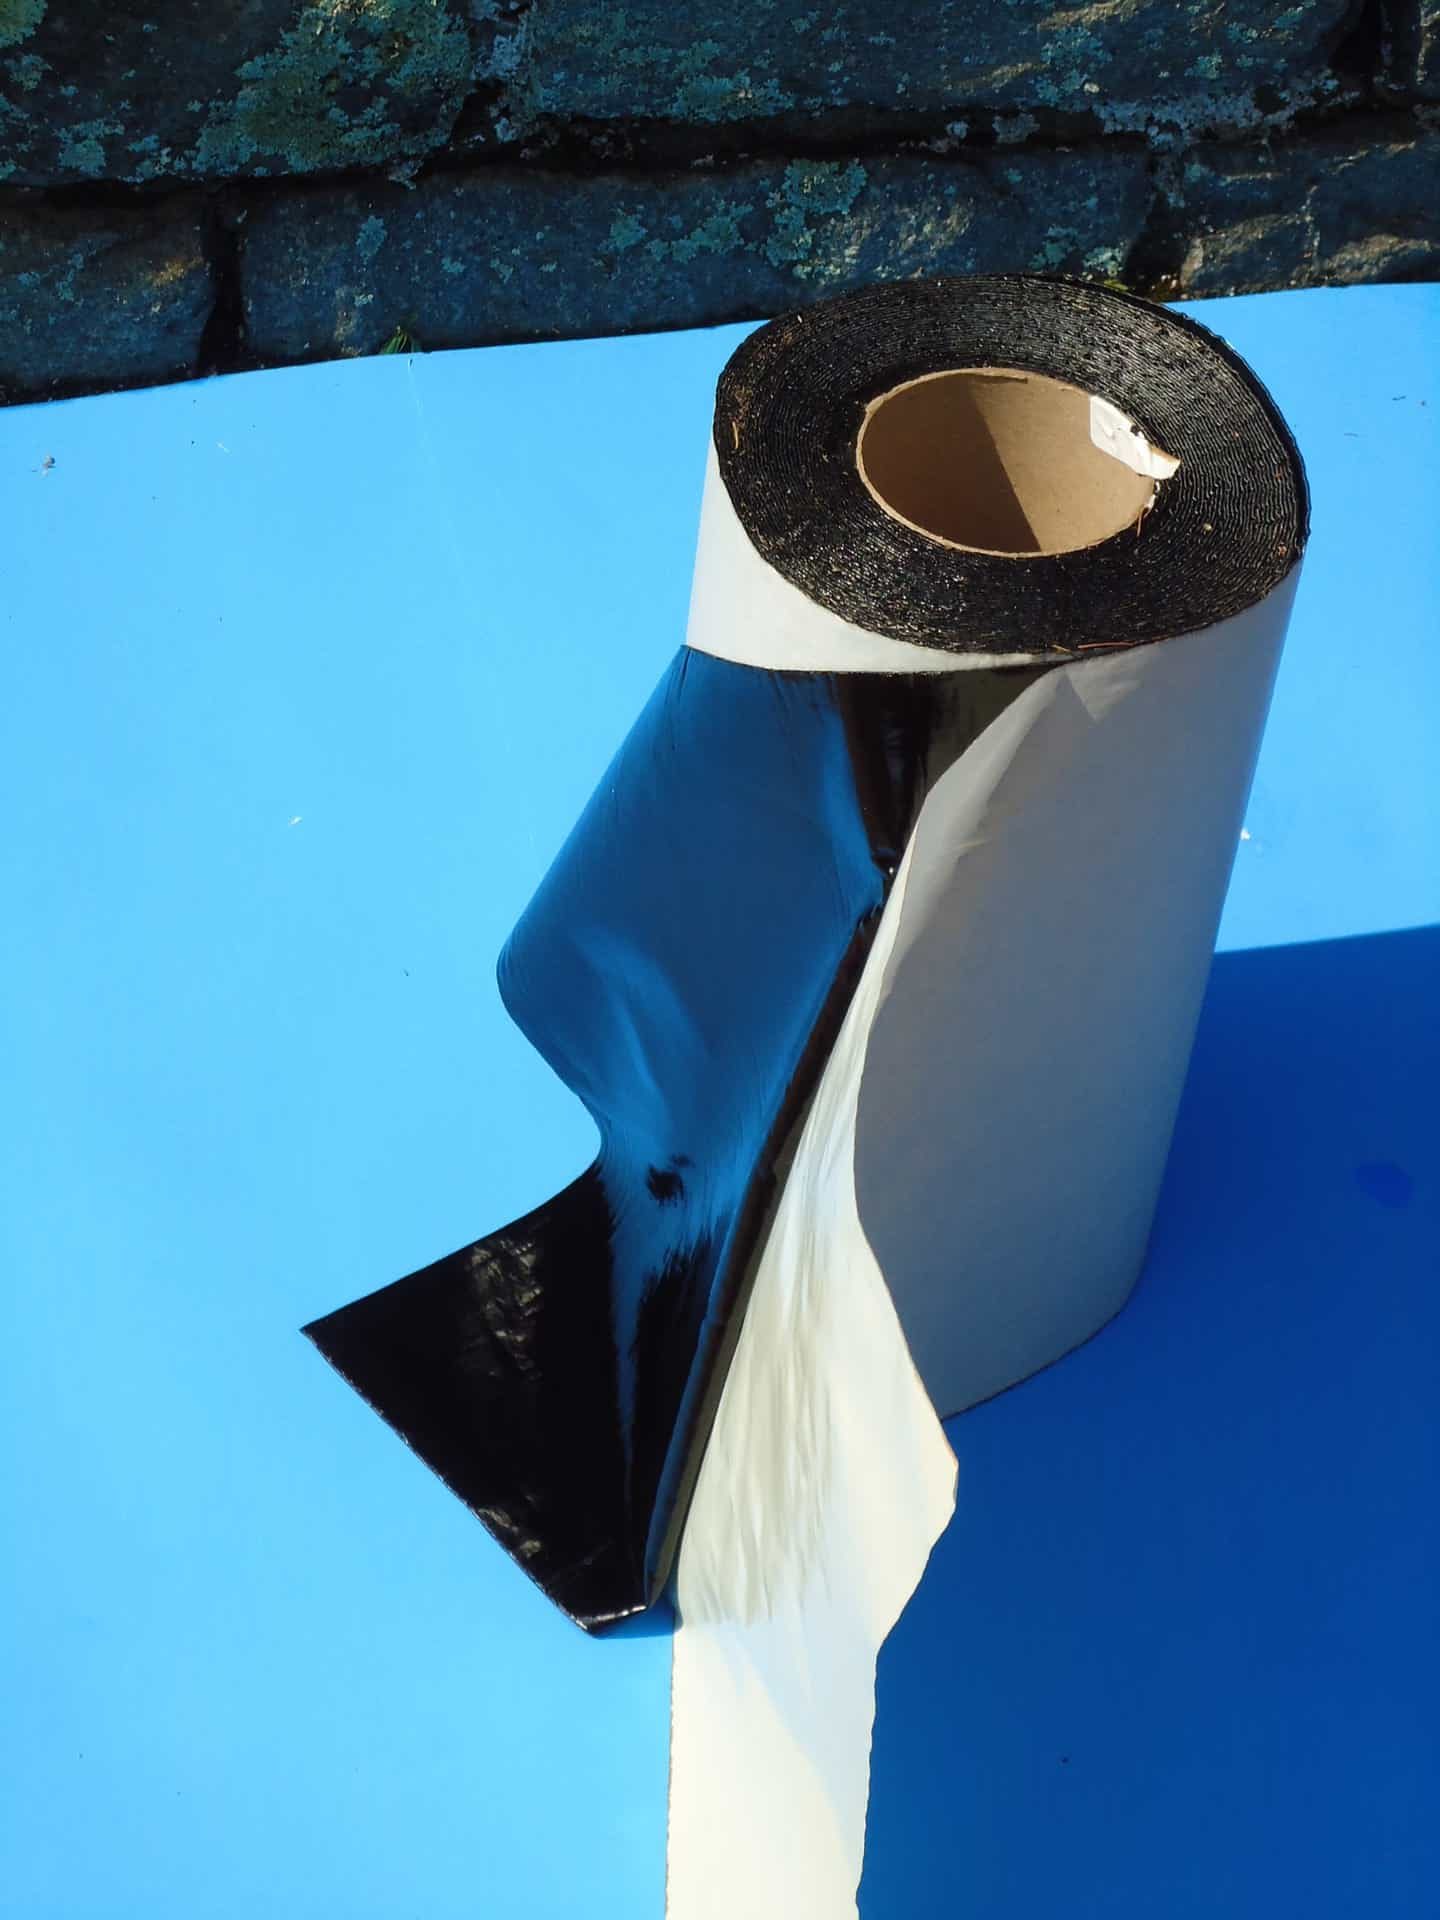 A roll of black tape is on the ground.